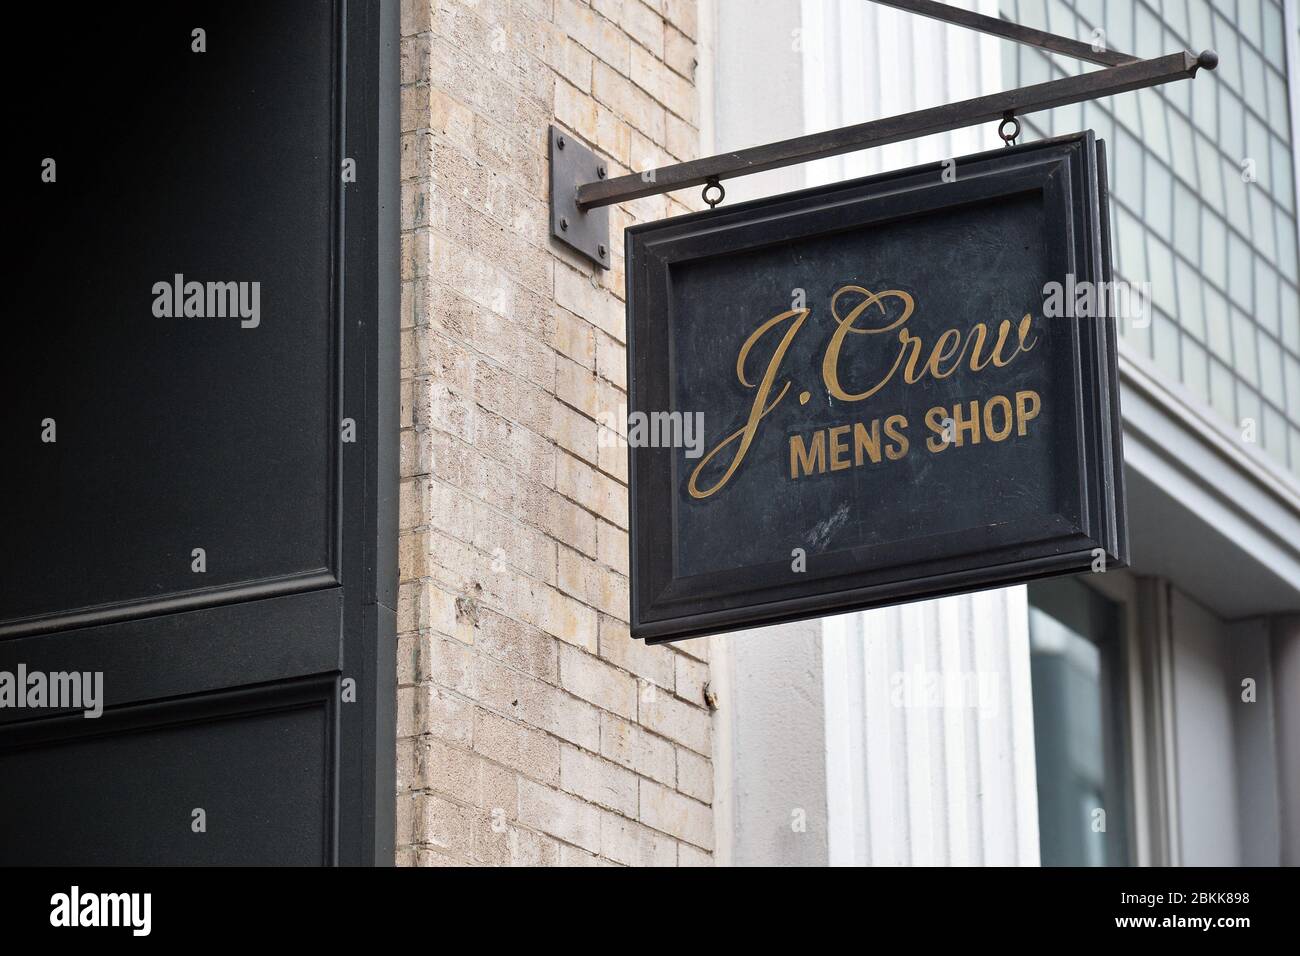 New York City, USA. 04th May, 2020. American retailer J.Crew filed for bankruptcy on Monday May 4th, becoming the first casualty of the economic effect of the Coronavirus pandemic, New York, NY, May 4, 2020. Other retailers such as JCPenney and Sears are also suffering under COIVD-19 pandemic's effects that have forced people to stay home and away from major retail stores. (Anthony Behar/Sipa USA) Credit: Sipa USA/Alamy Live News Stock Photo